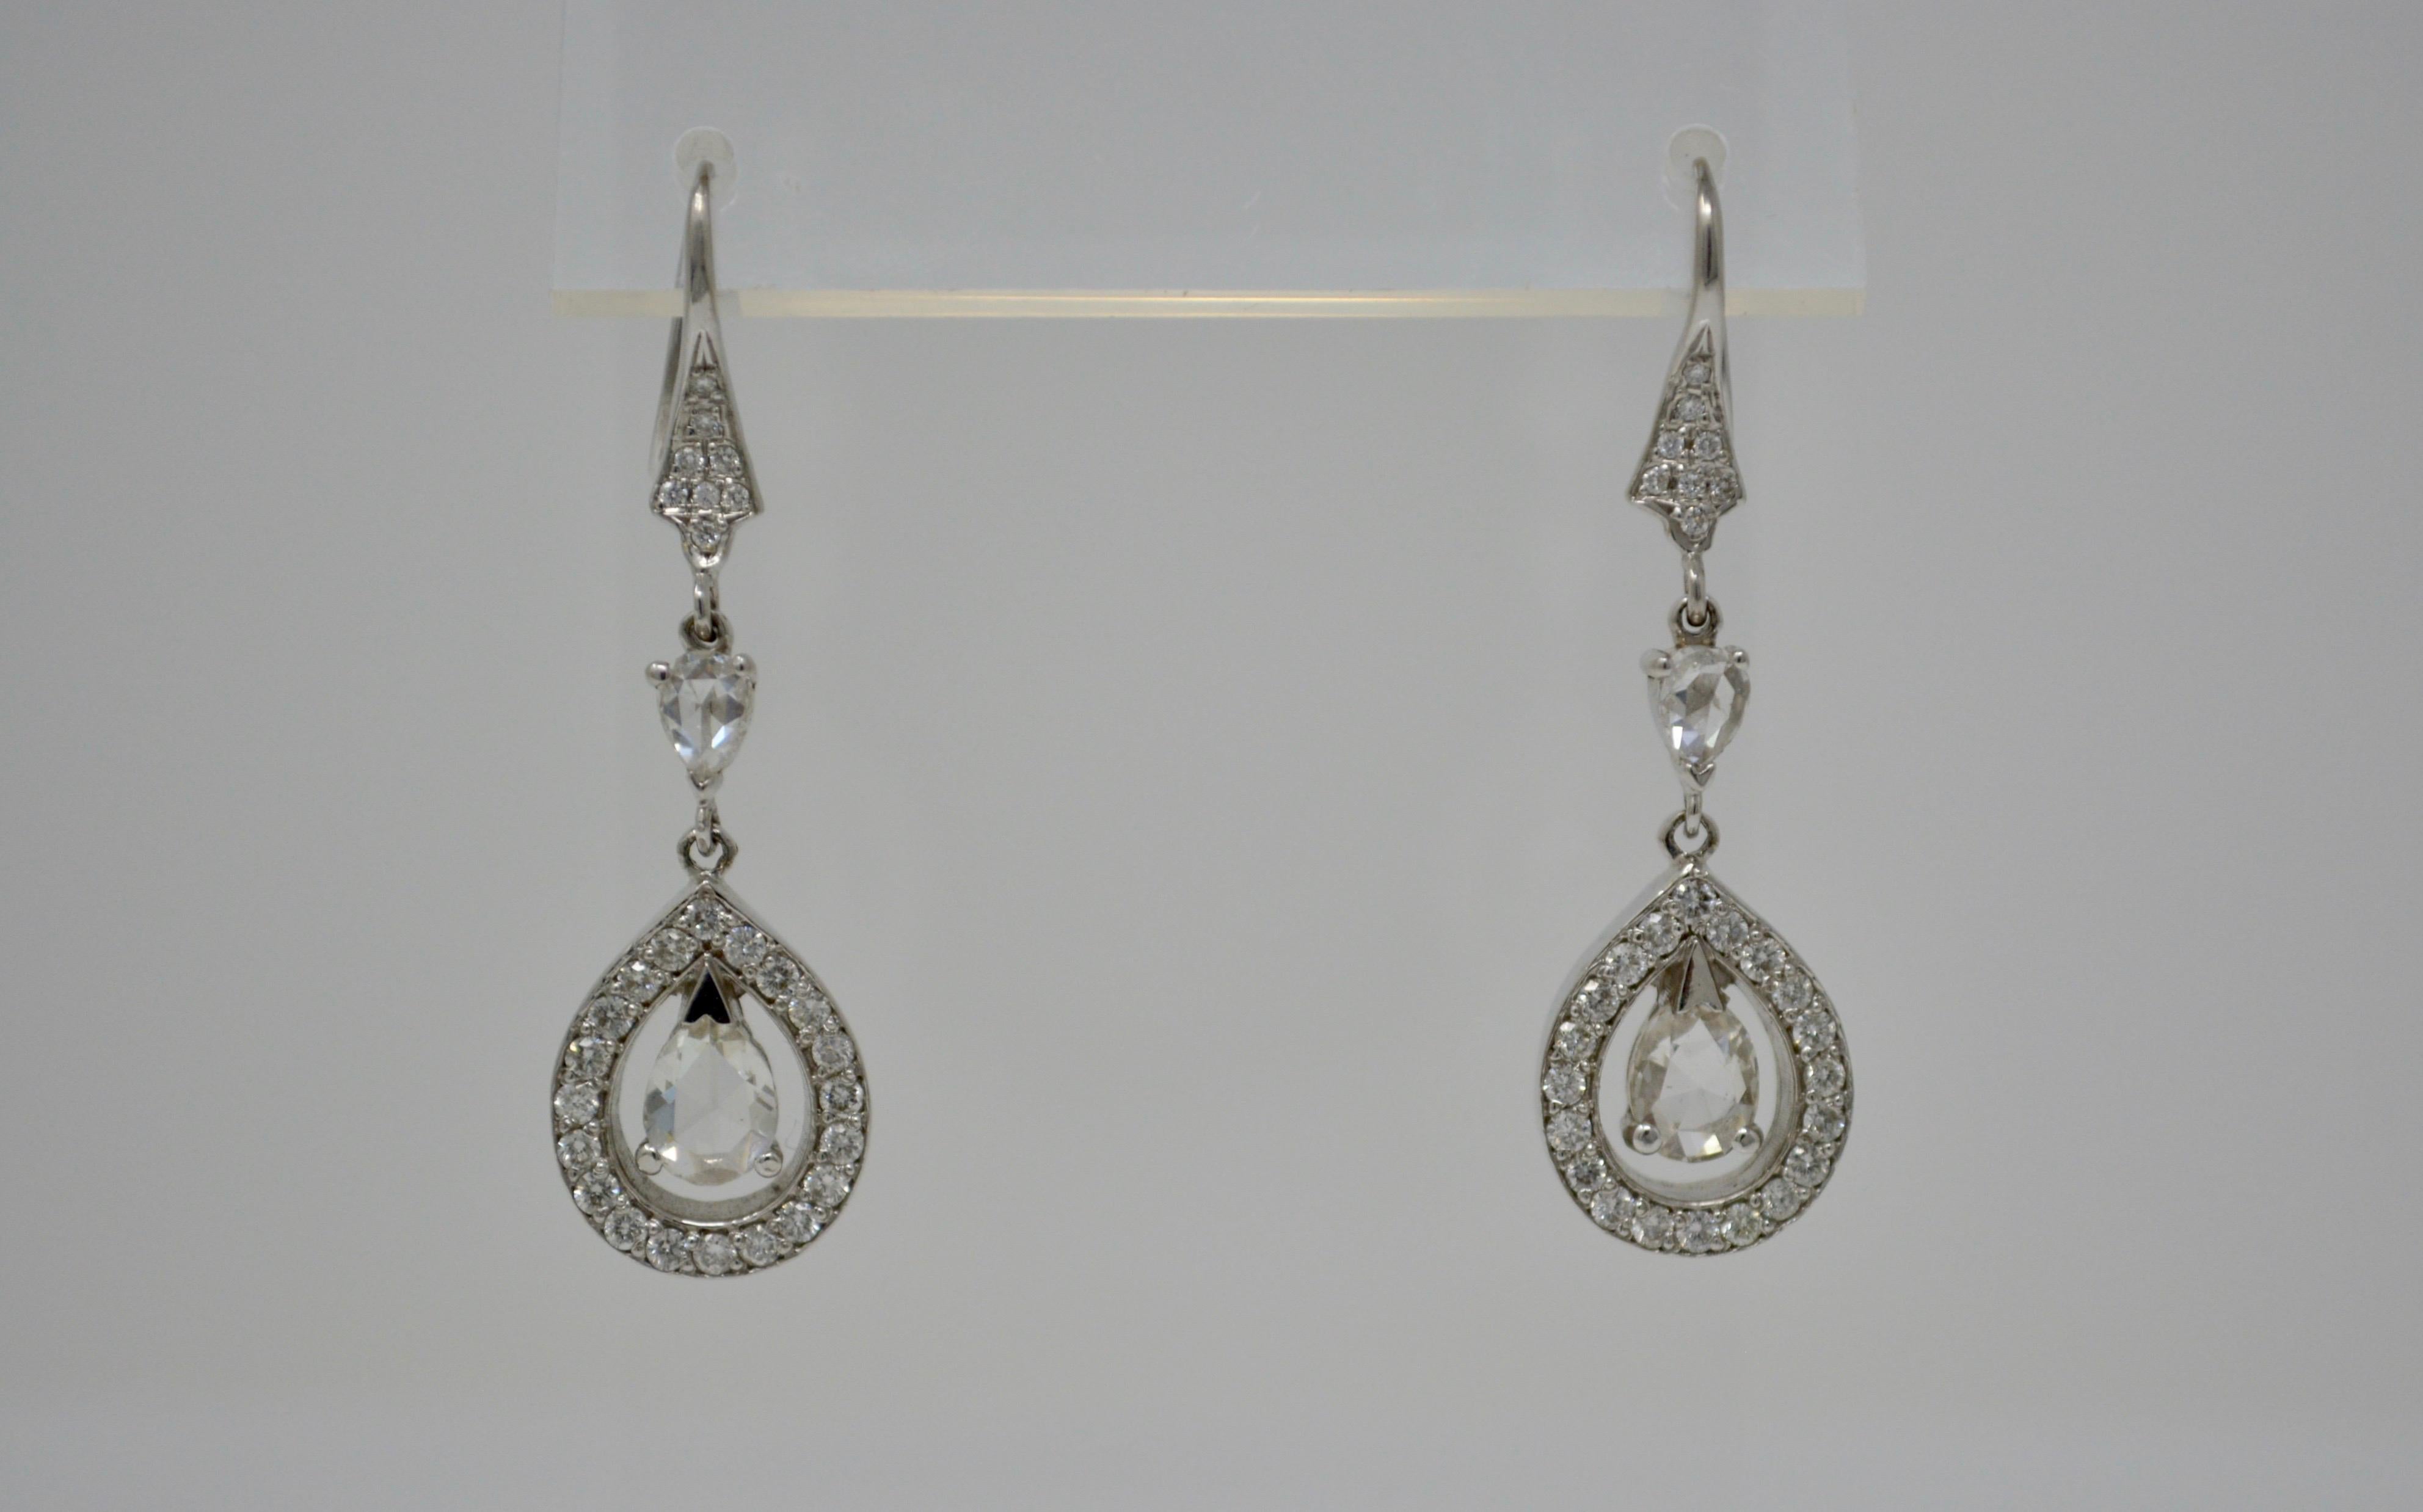 A unique pair of rose cut diamond drop earrings features two big pear shape rose cut diamonds with G-H color with VS clarity set in the center of diamond studded pear shape frame which is suspended by two small rose cut pear shape diamond with F-G